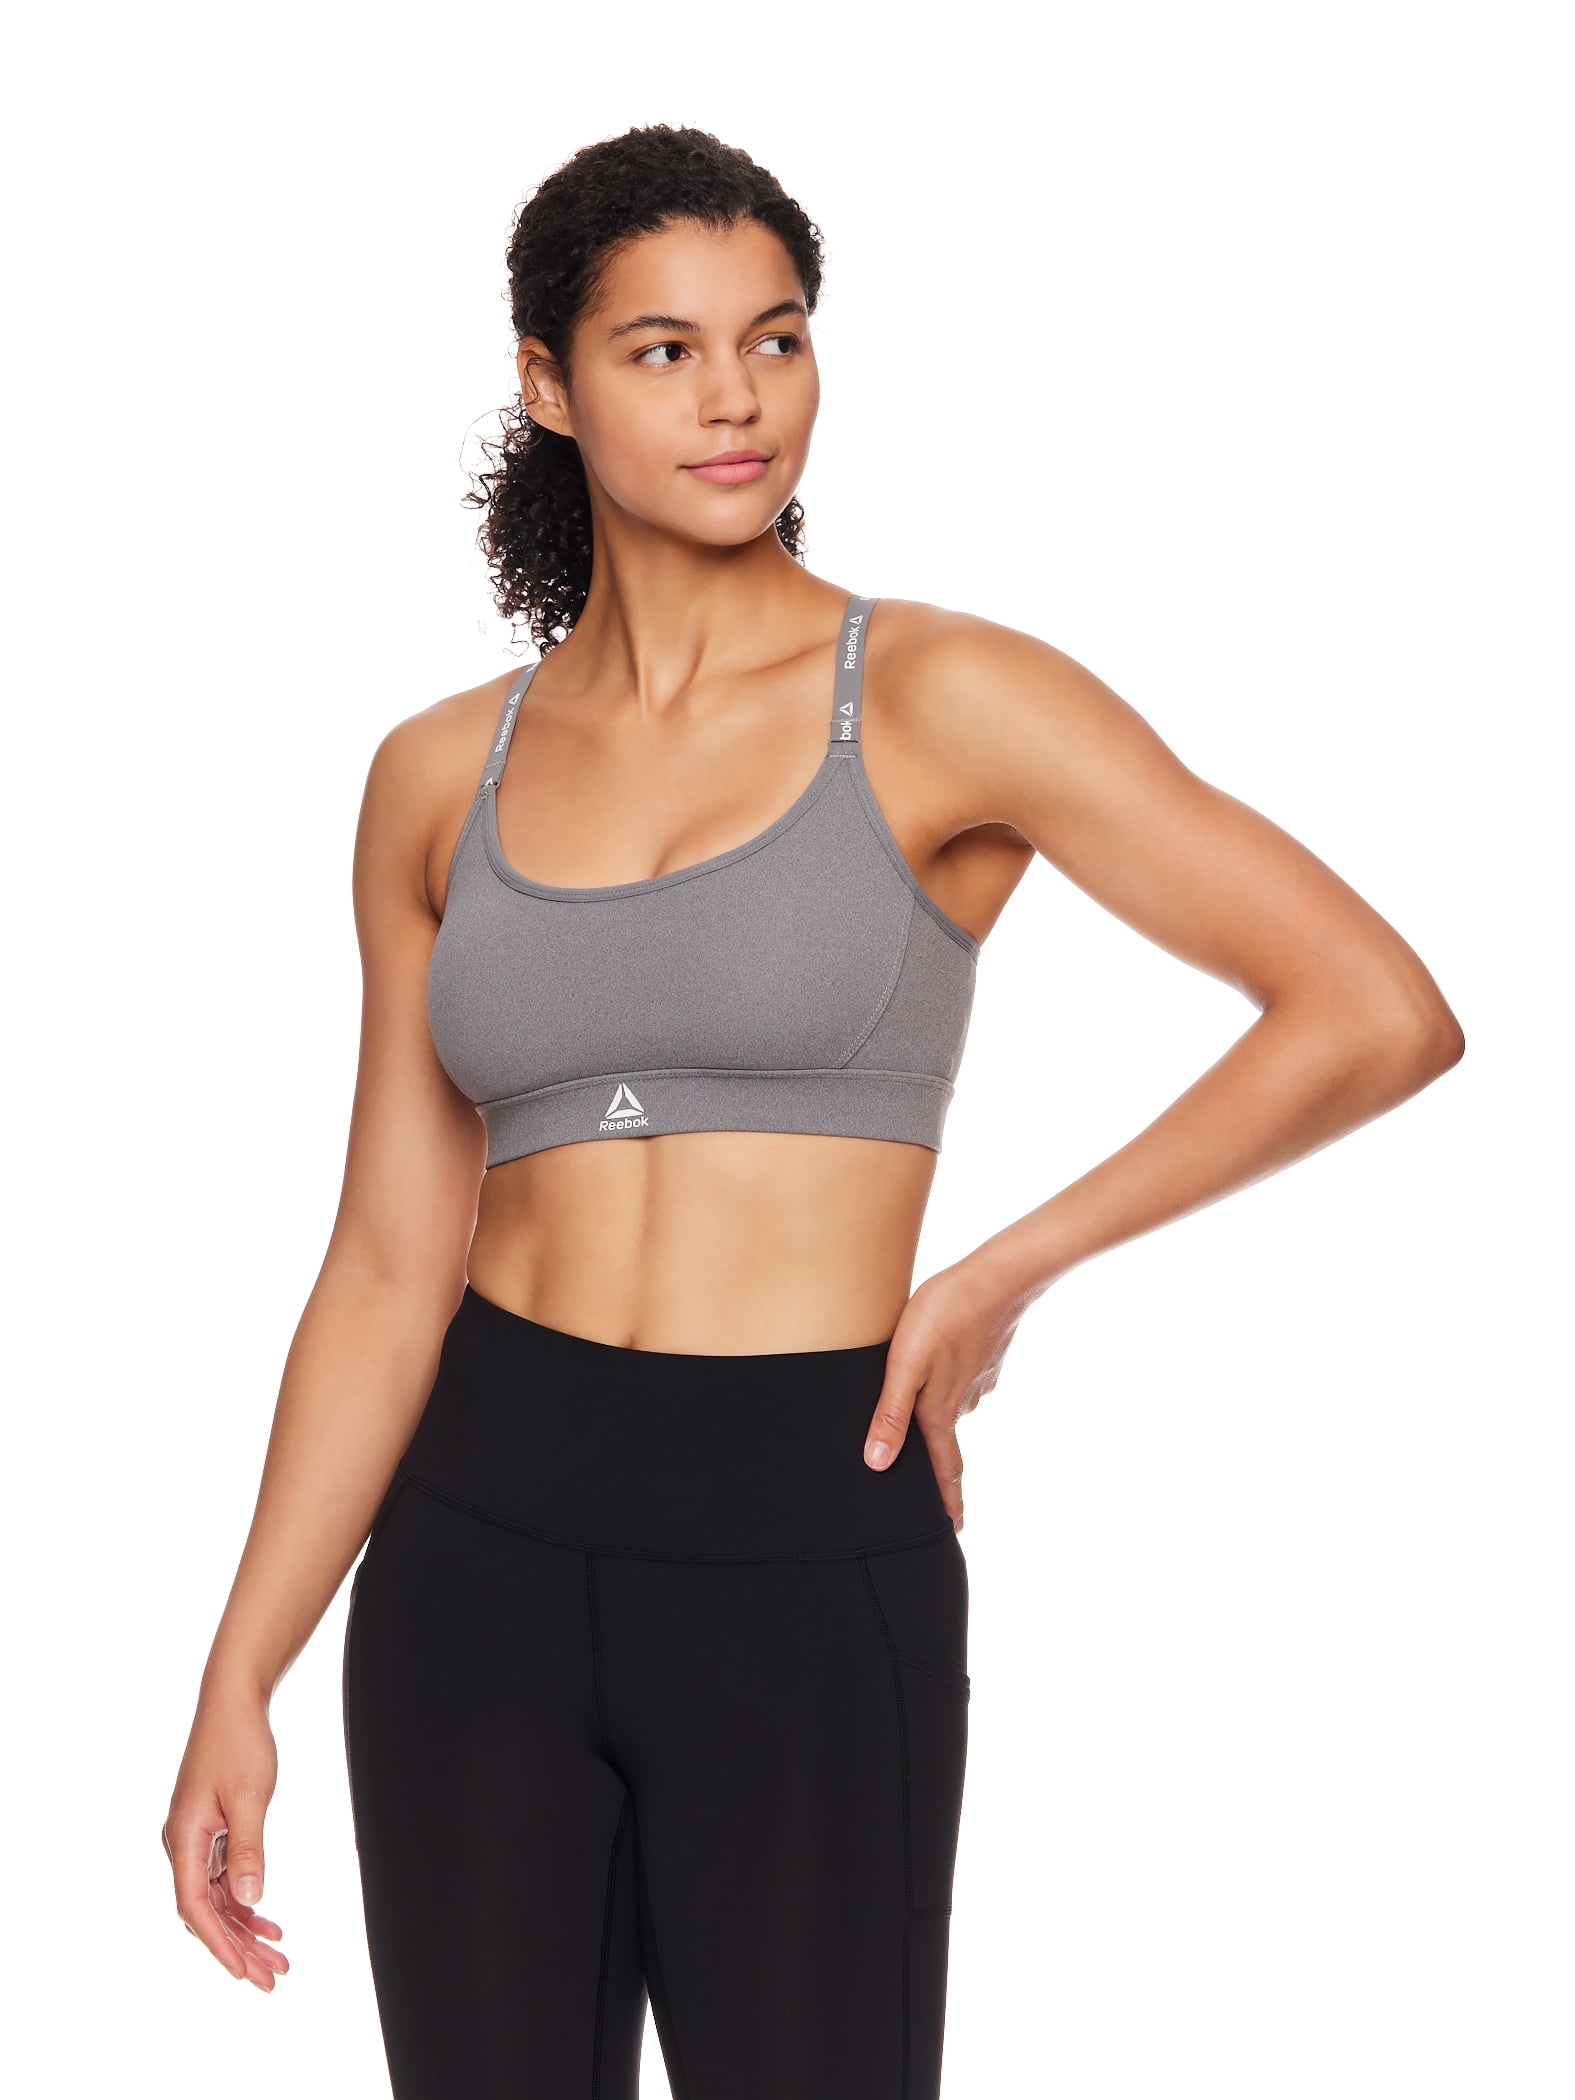 Reebok Women's Low Impact Favorite Bra with Removeable Cups, Sizes